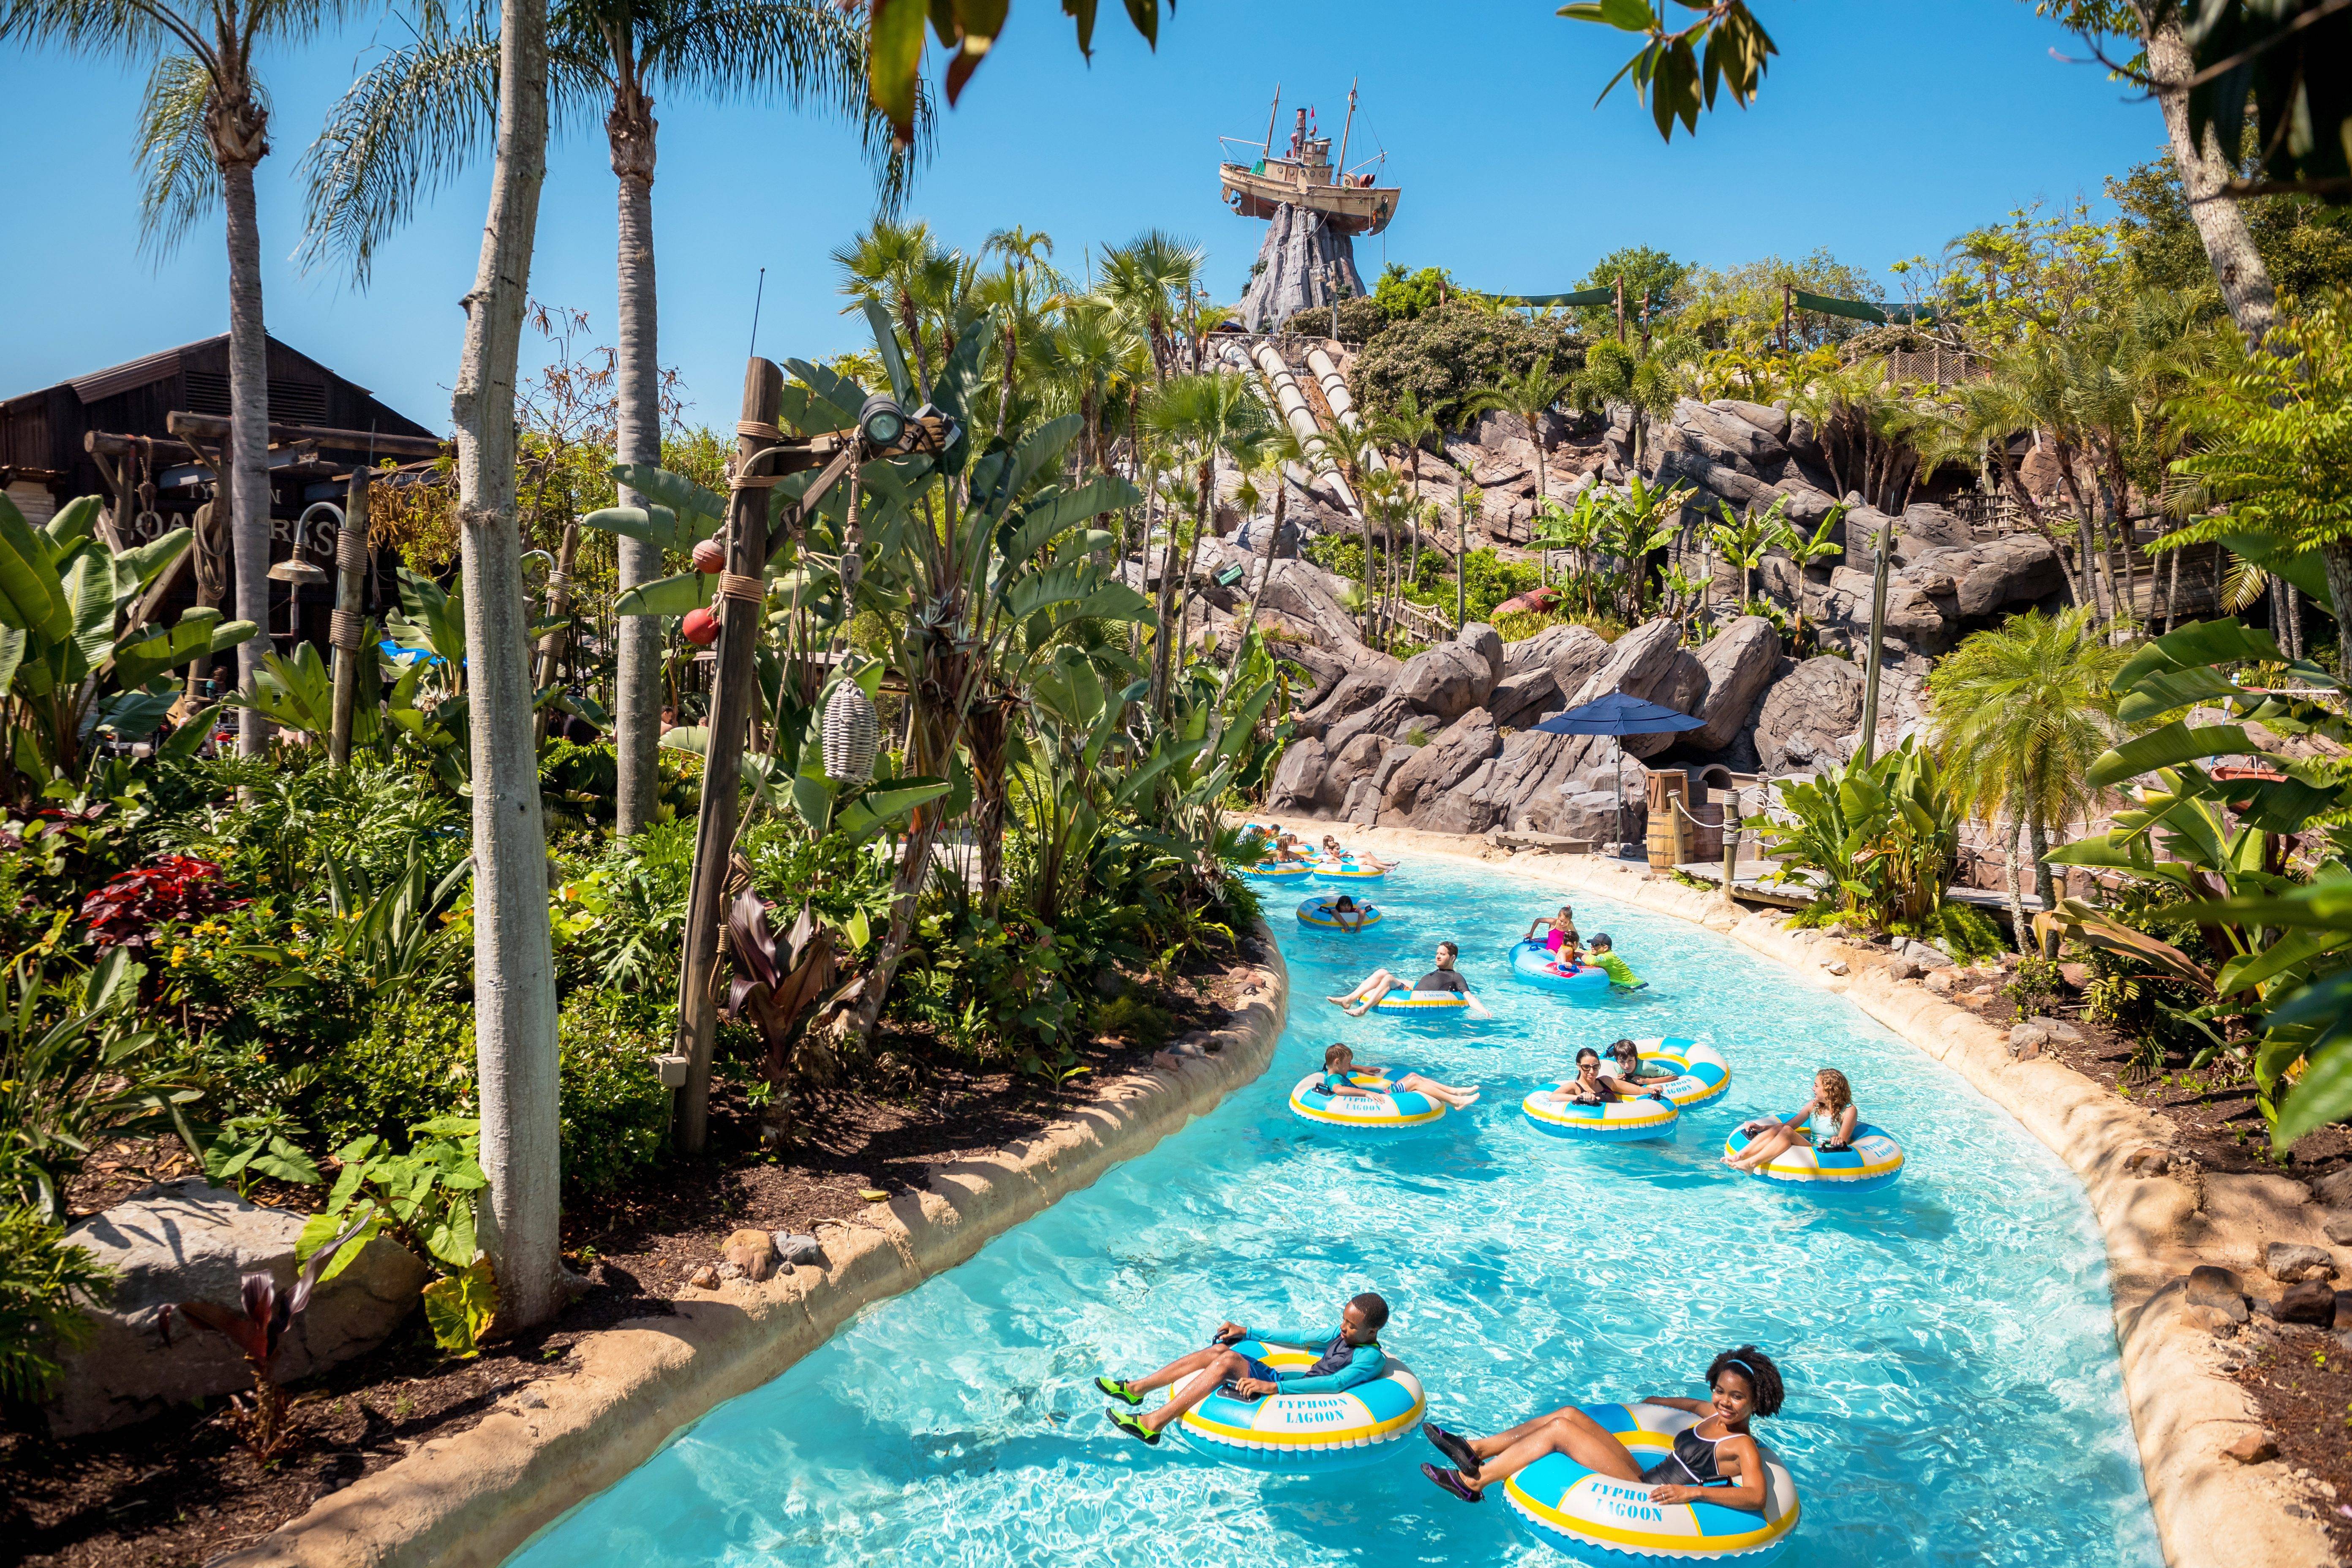 1 Day at a Disney water park is now $79